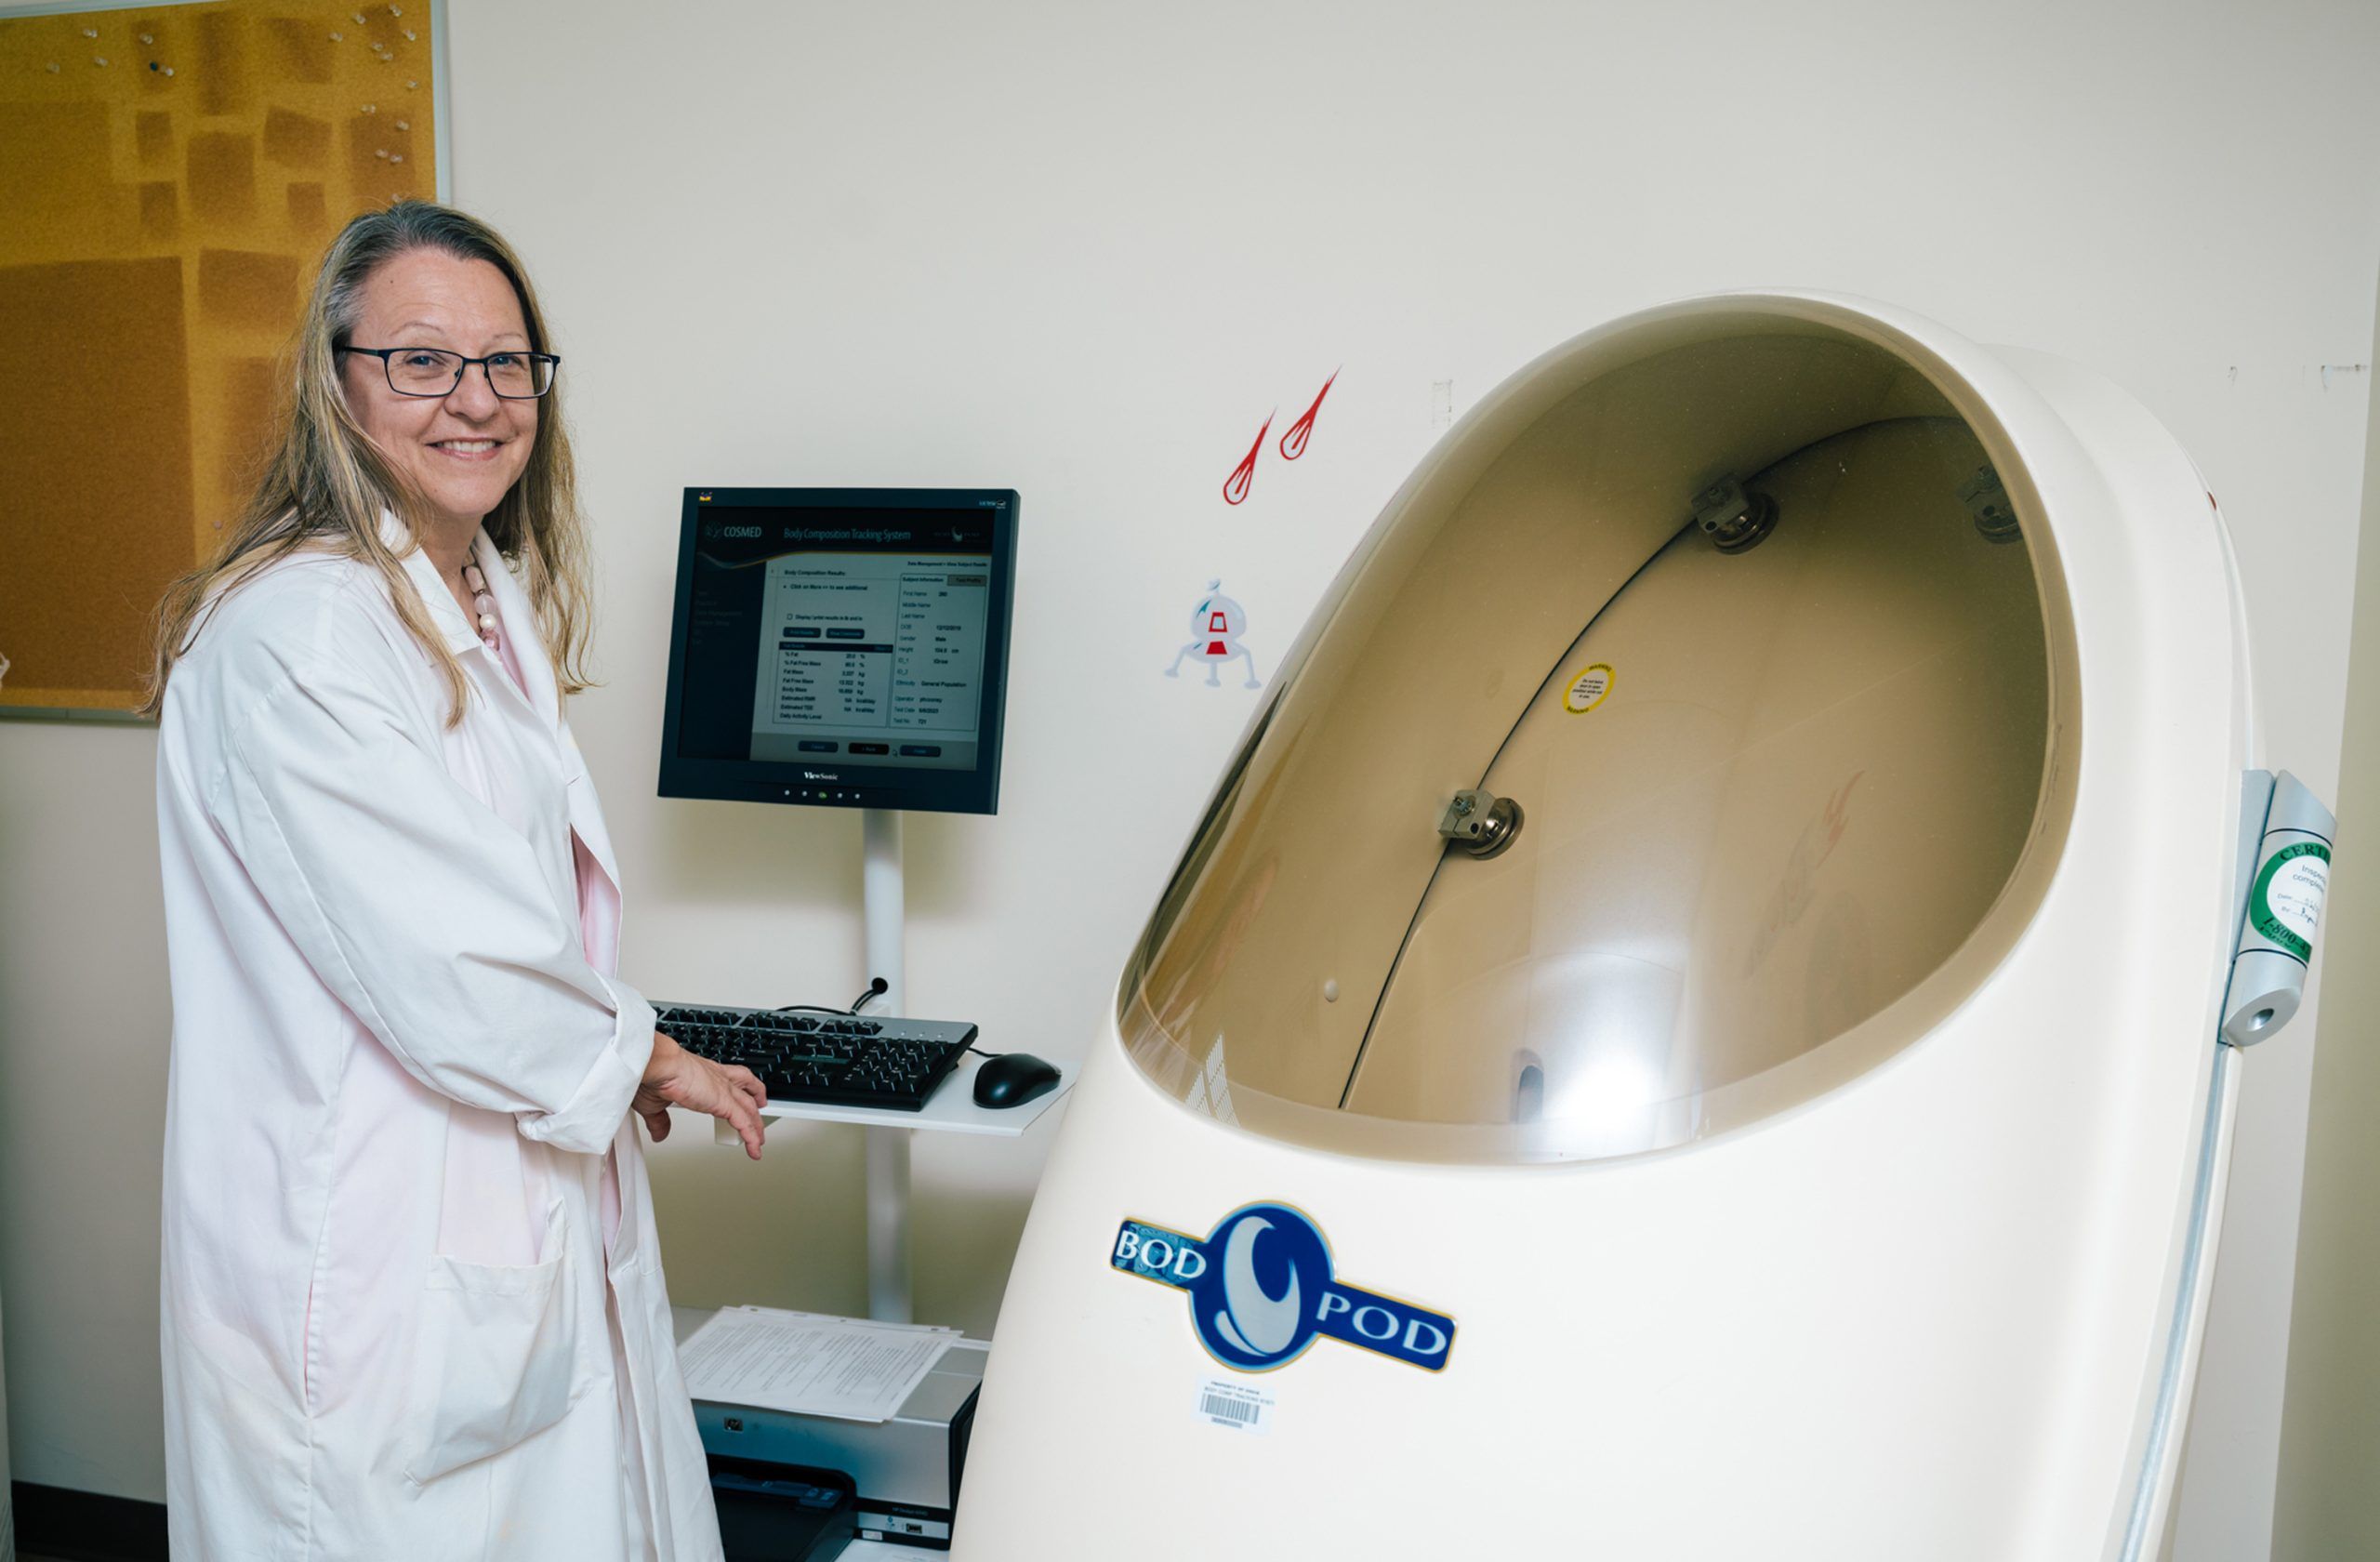 Wideman next to the Bod Pod, a machine that takes measurements of a child's body